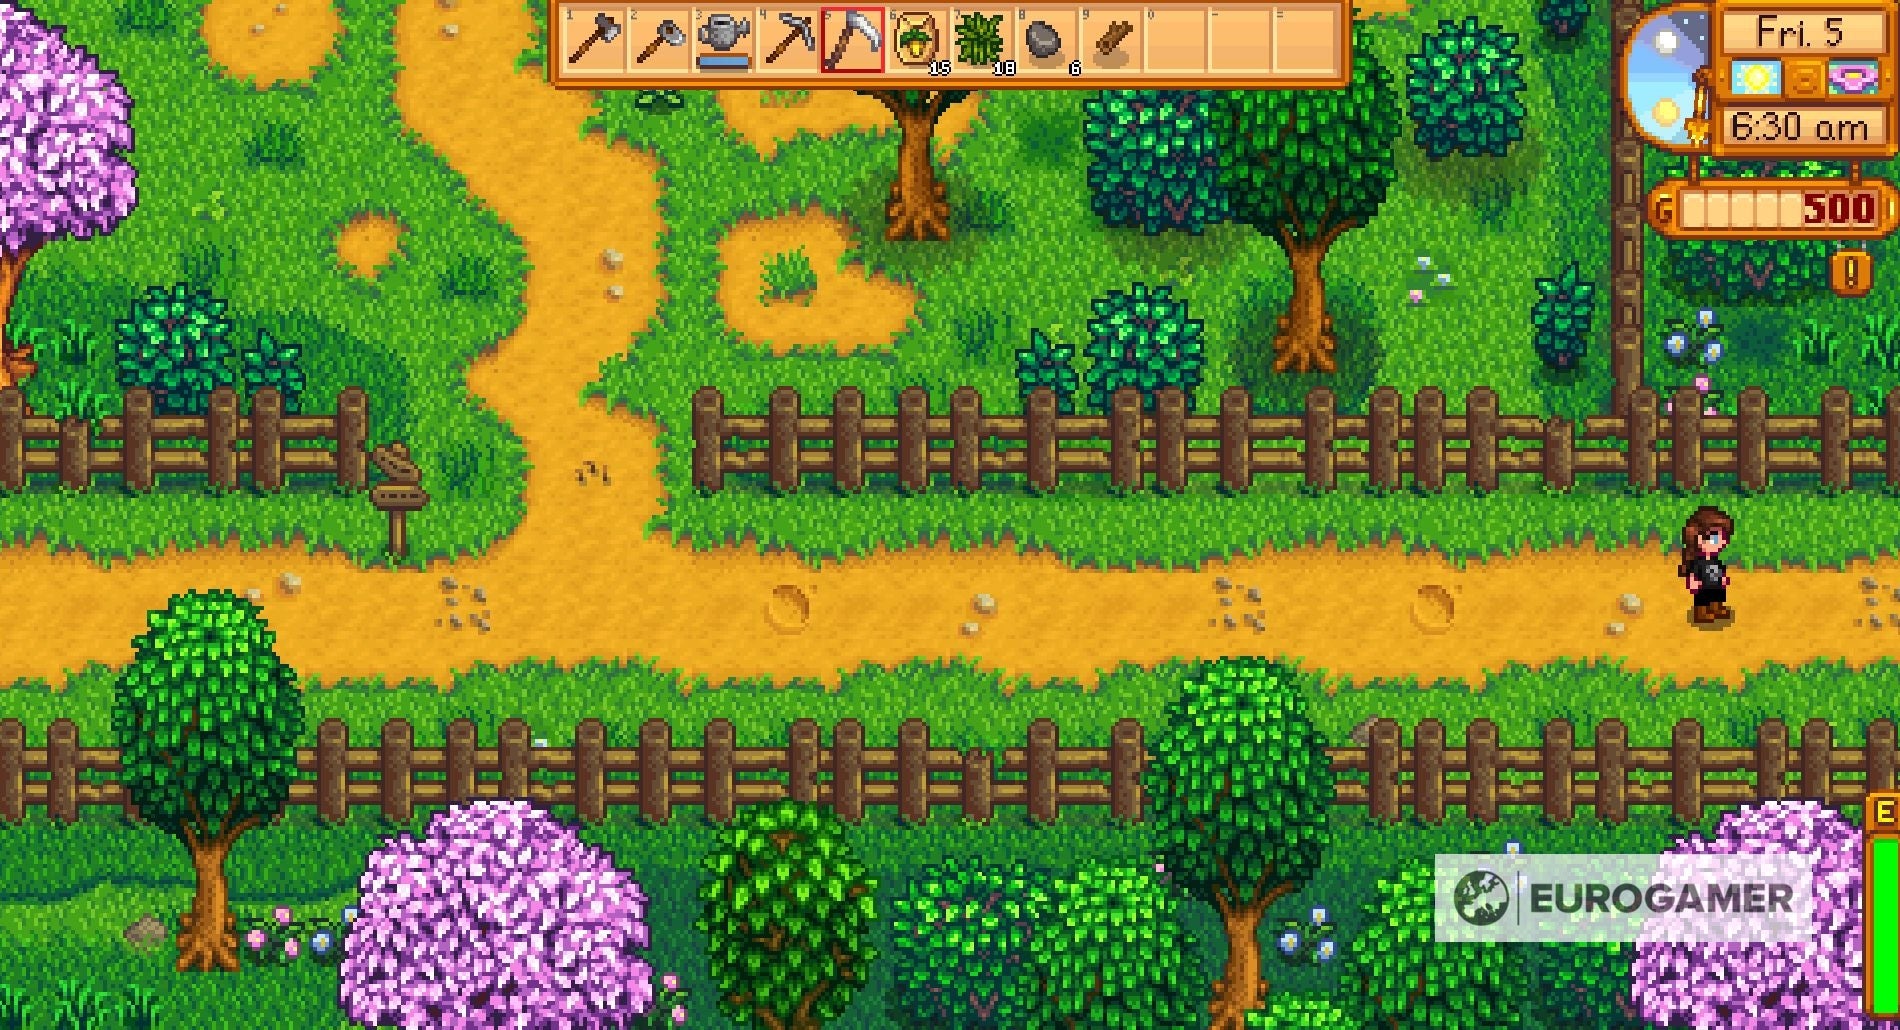 Stardew Valley patch 1.6 is on the way | Eurogamer.net